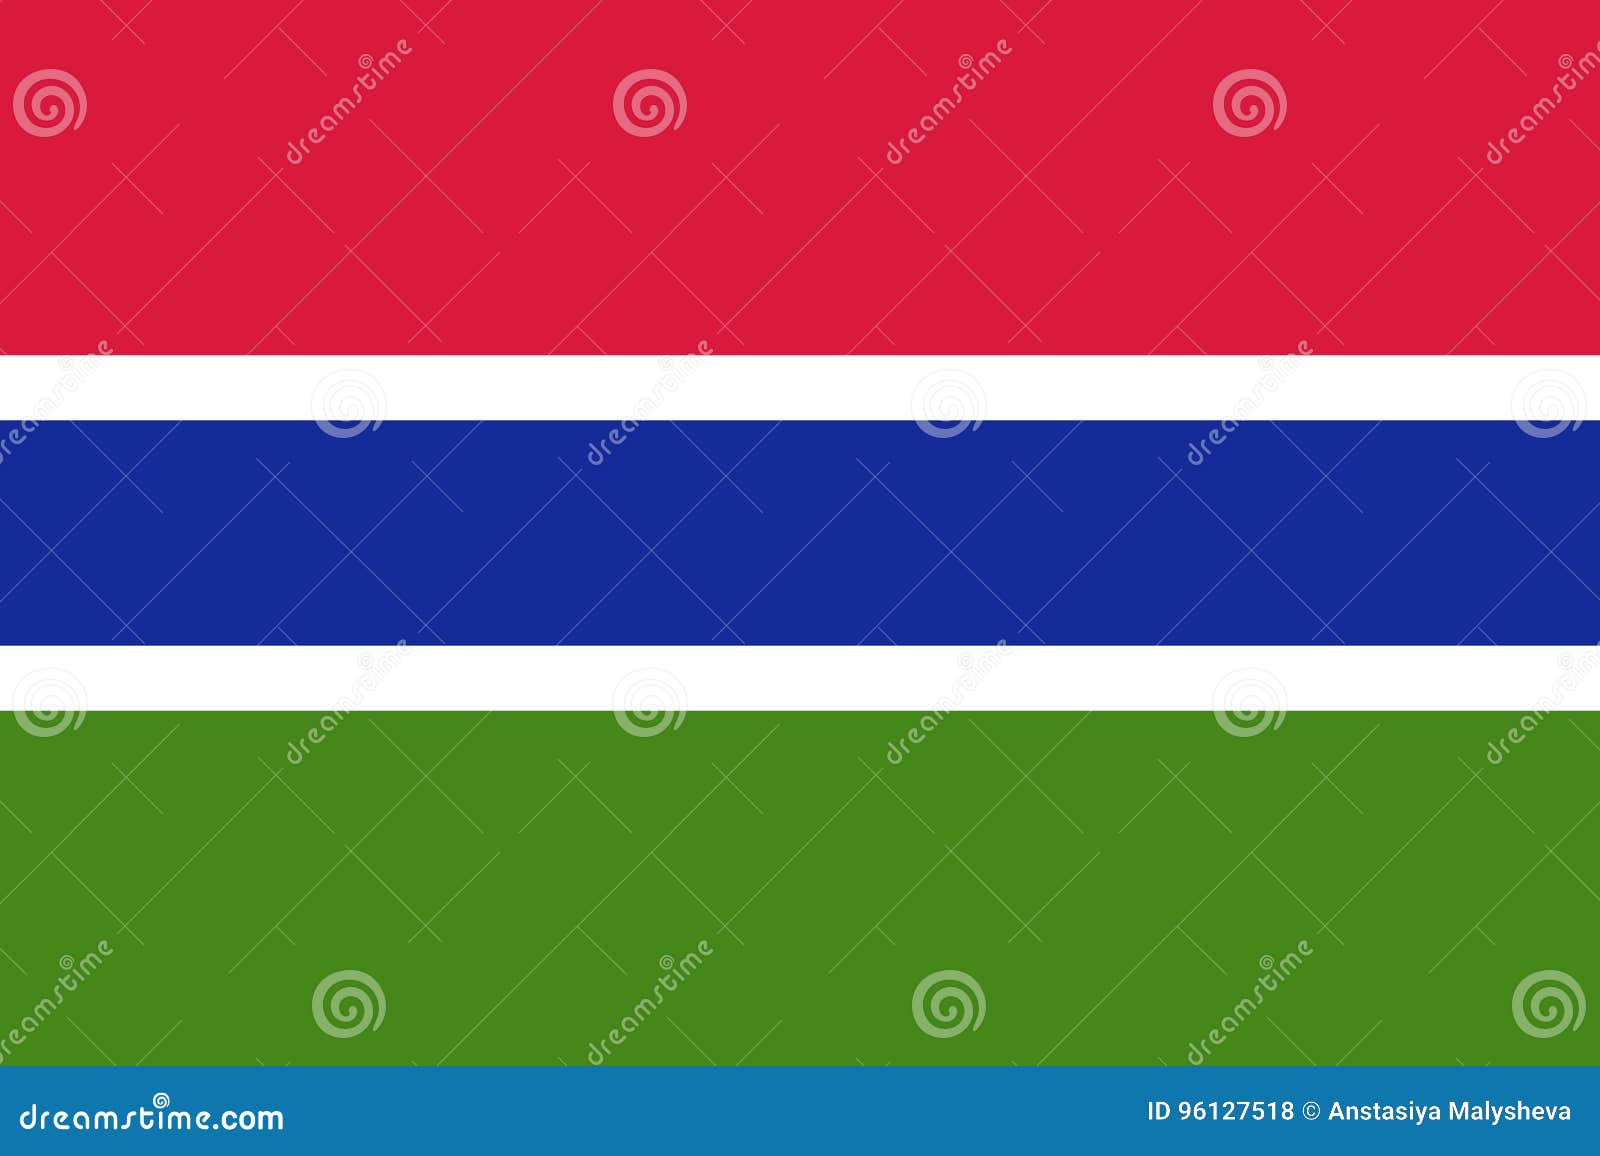 Gambia Country Flat Style Flag Vector - Illustration of correct, sign: 96127518